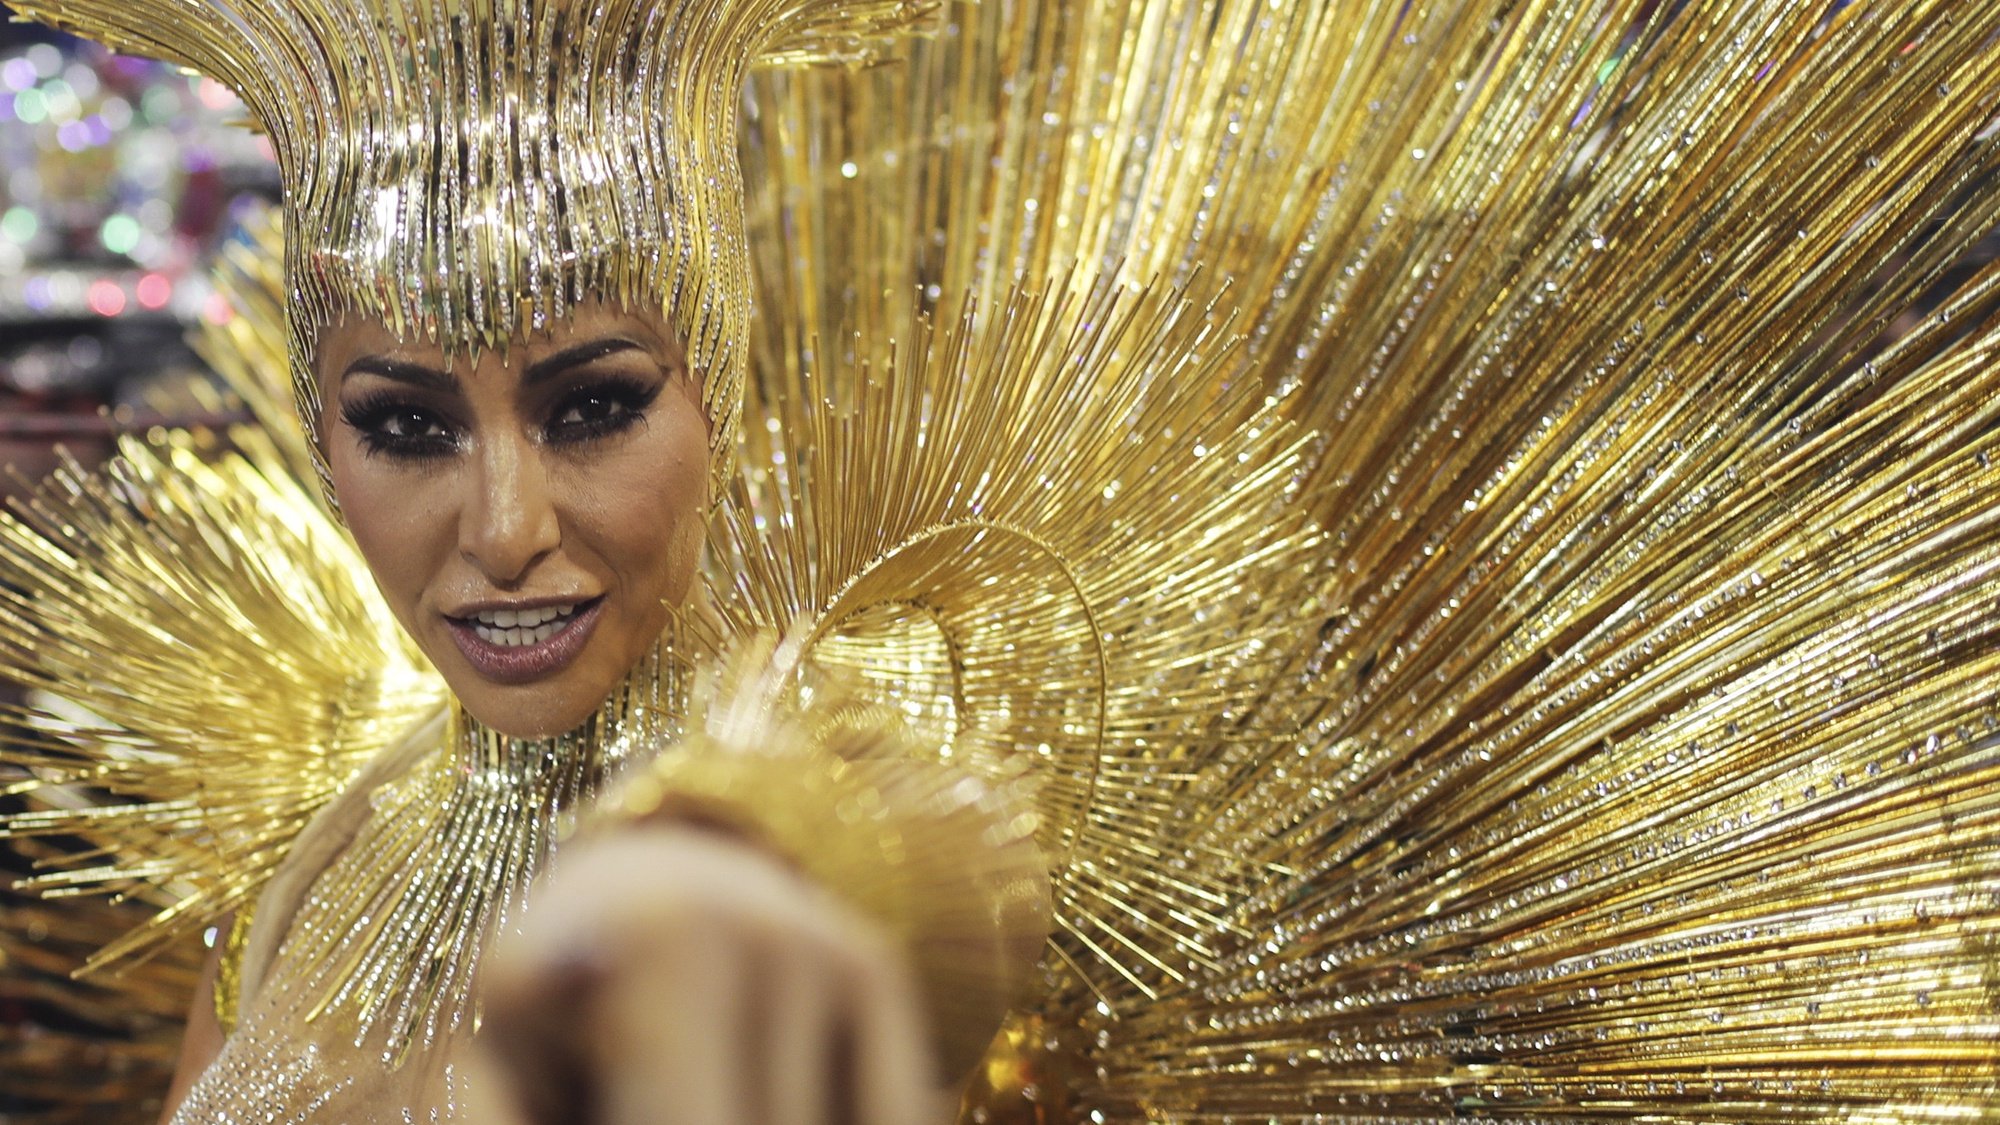 epa08446655 A dancer of the samba school Grupo Especial Vila Isabel is dressed in gold as she takes part in the carnival celebration in Rio de Janeiro, Brazil, 11 February 2018 (reissued 27 May 2020). Gold is considered a majestic color that symbolizes wealth and luxury. It is associated with success, achievement, and triumph, but it can also be deemed decadent and overindulgent. Connected with prestige and elegance, gold symbolizes divinity, power, and wisdom in many religions due to its association with masculine energy and the power of the sun.  EPA/ANTONIO LACERDA  ATTENTION: This Image is part of a PHOTO SET *** Local Caption *** 54107662